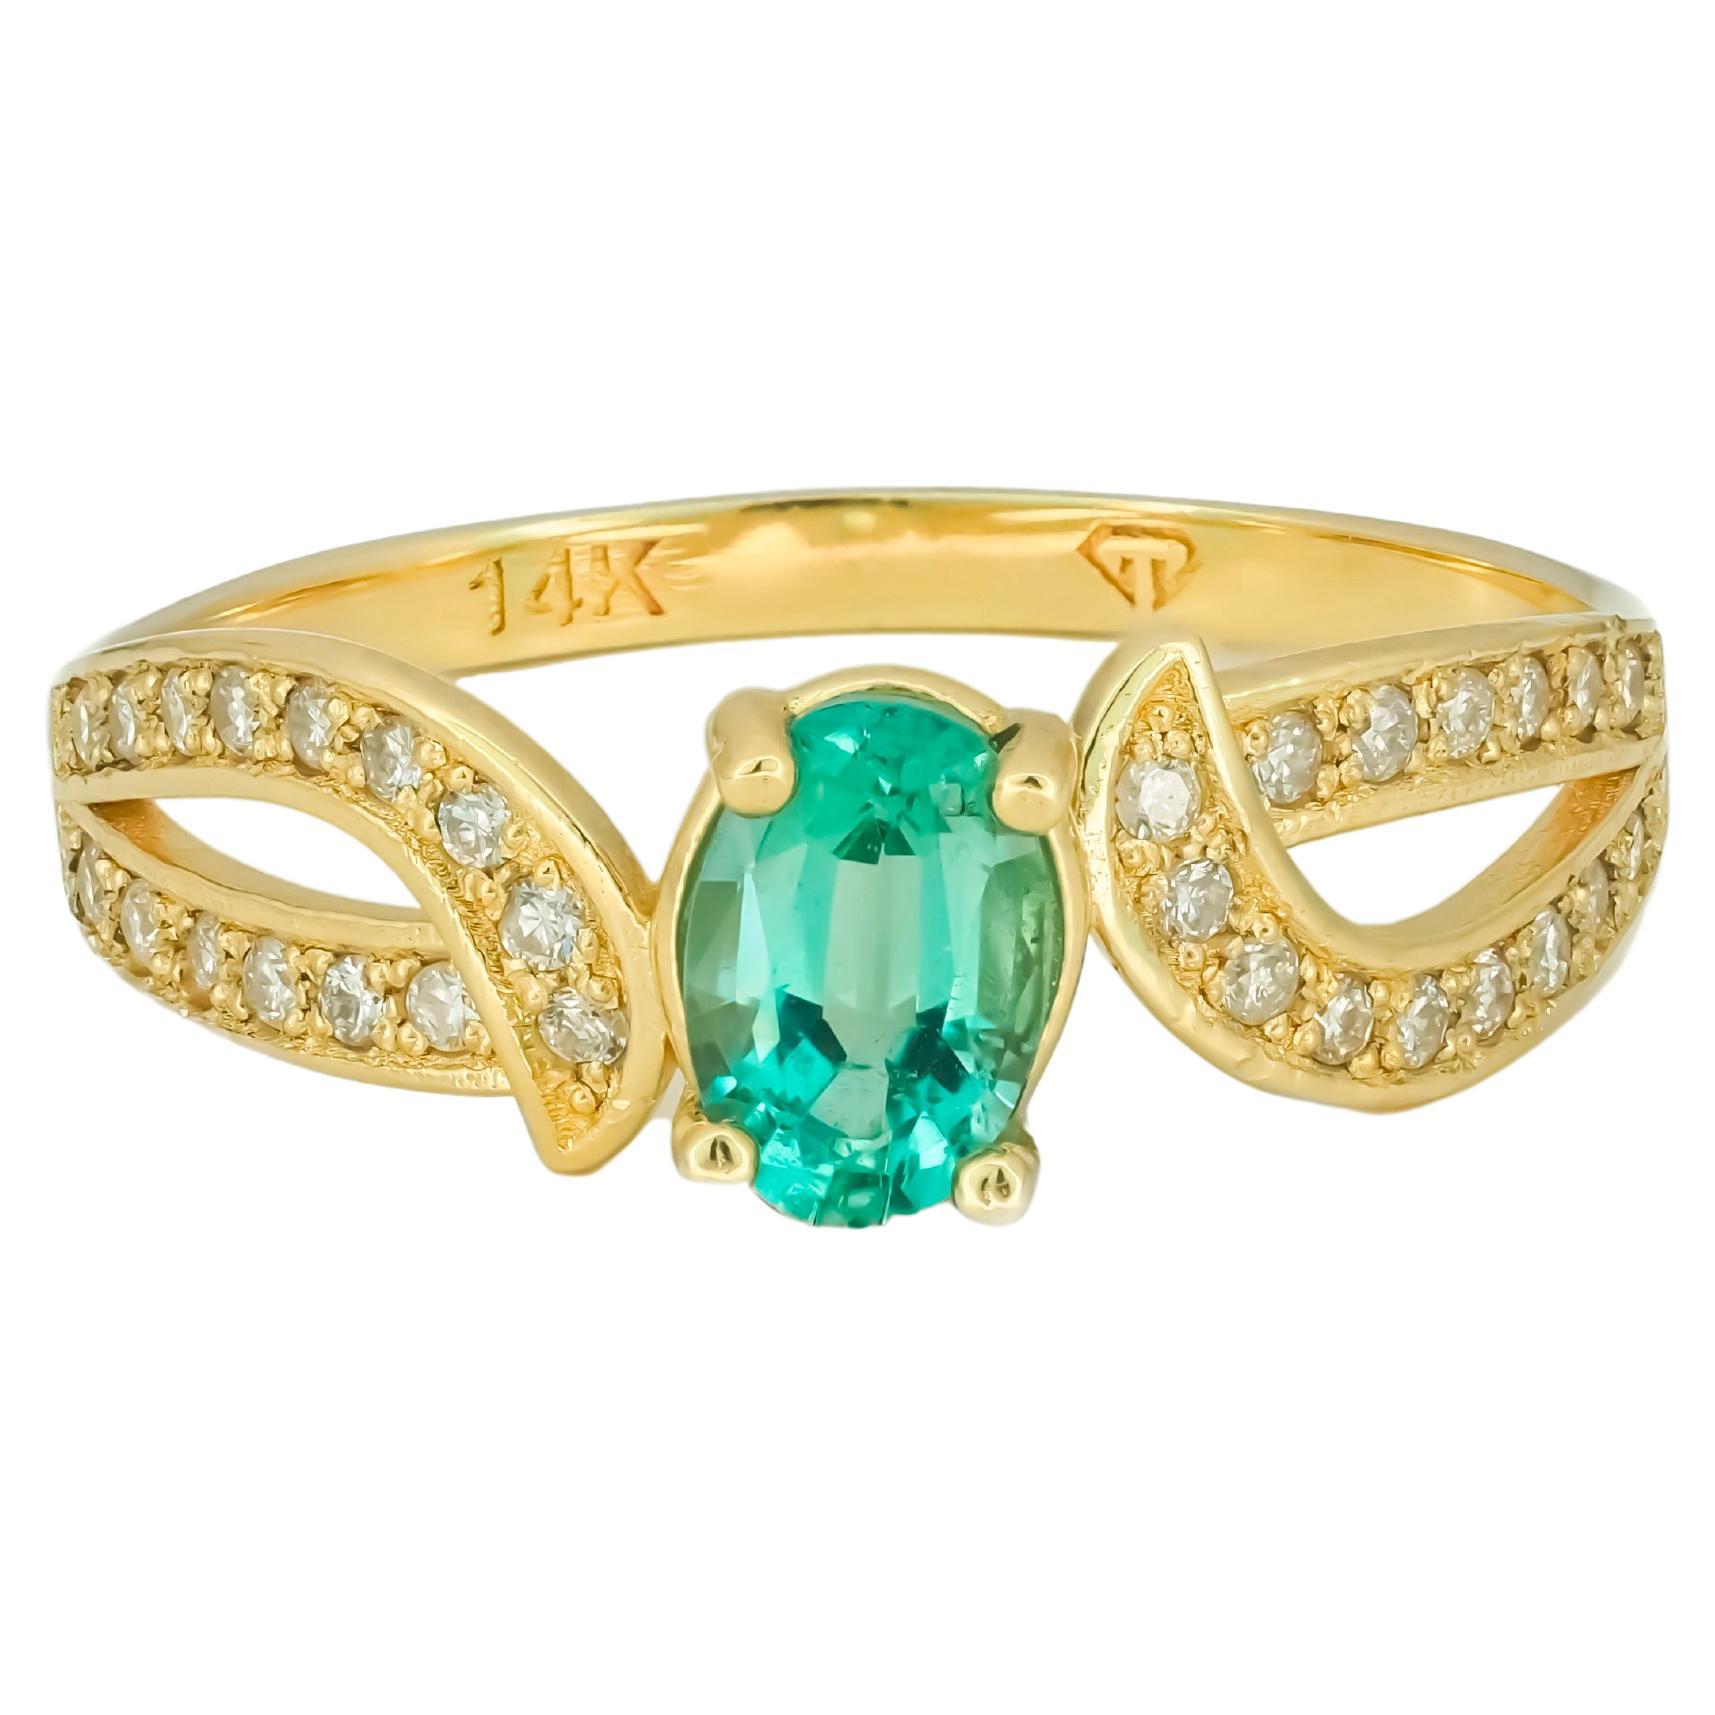 For Sale:  Emerald Vintage Ring, 14k Gold Ring with Emerald!